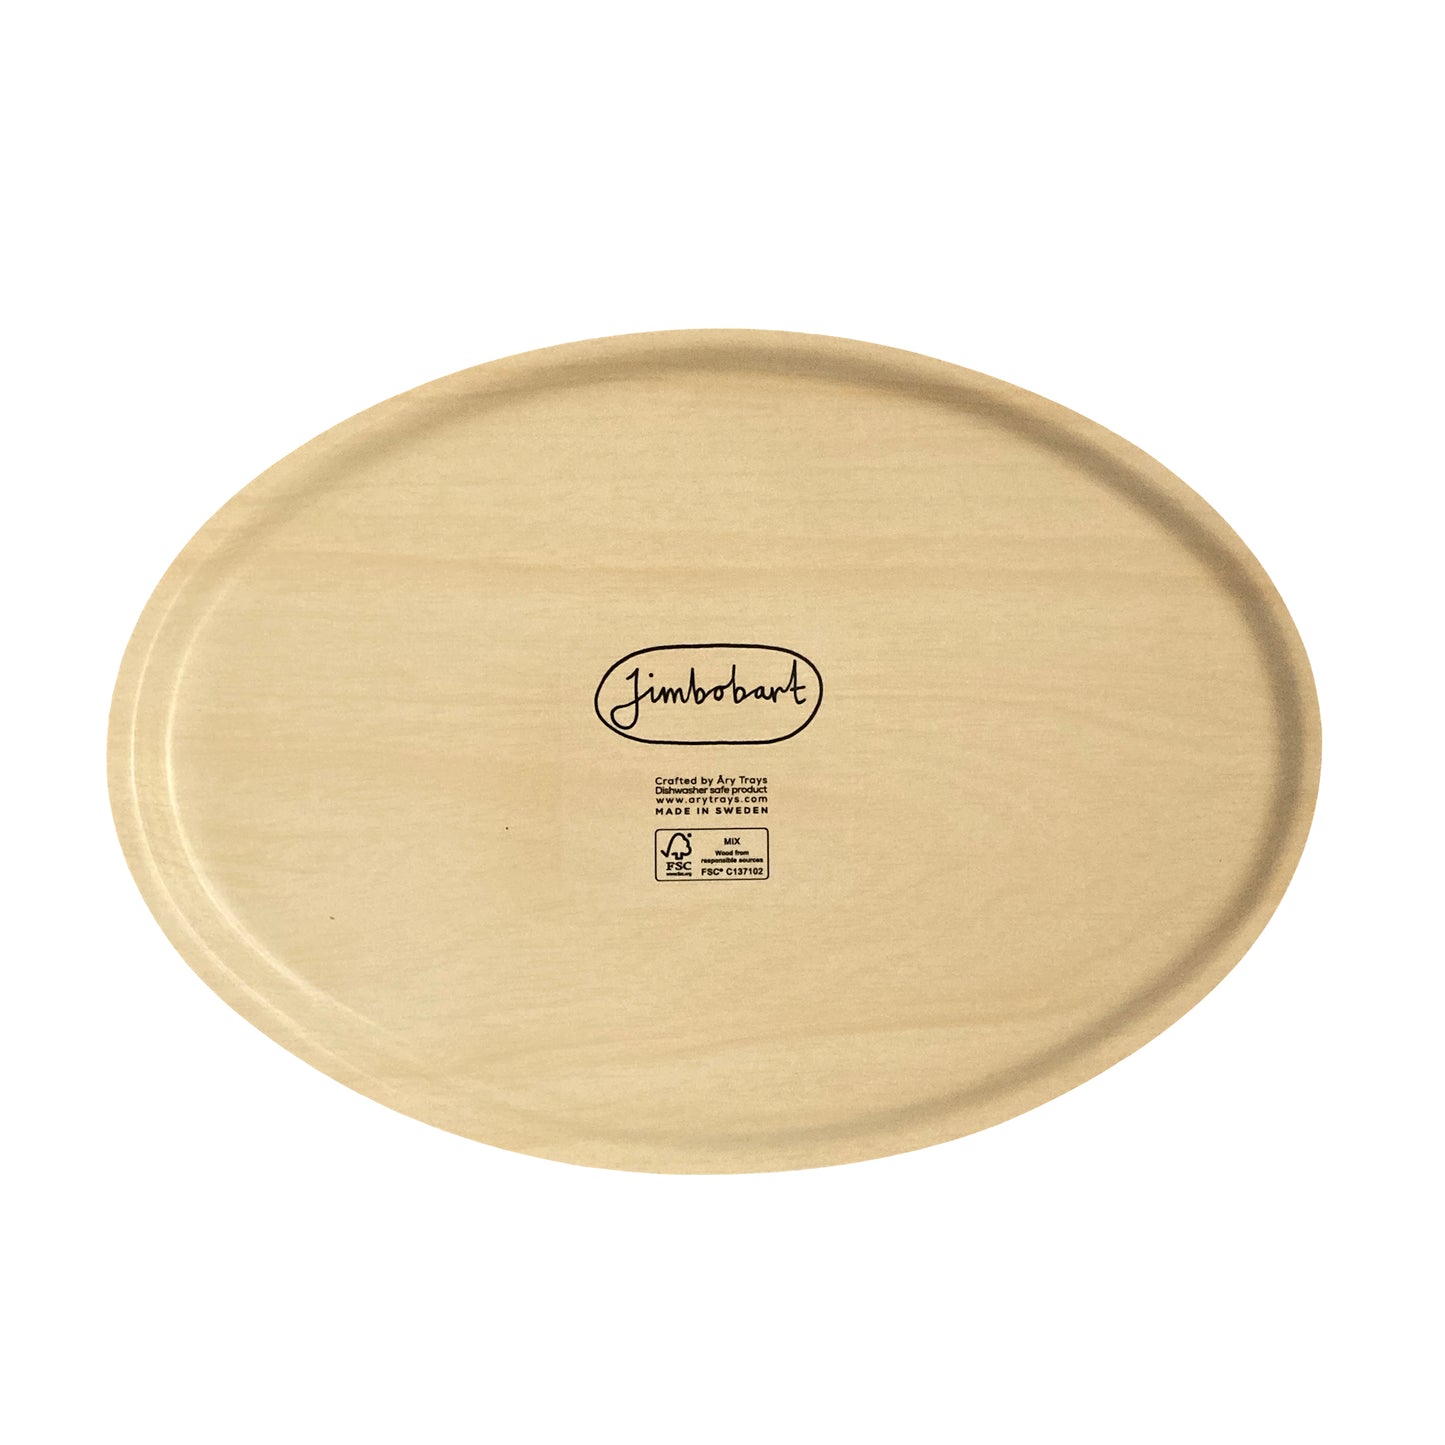 Guinea Pig Biscuits Oval Tea Tray